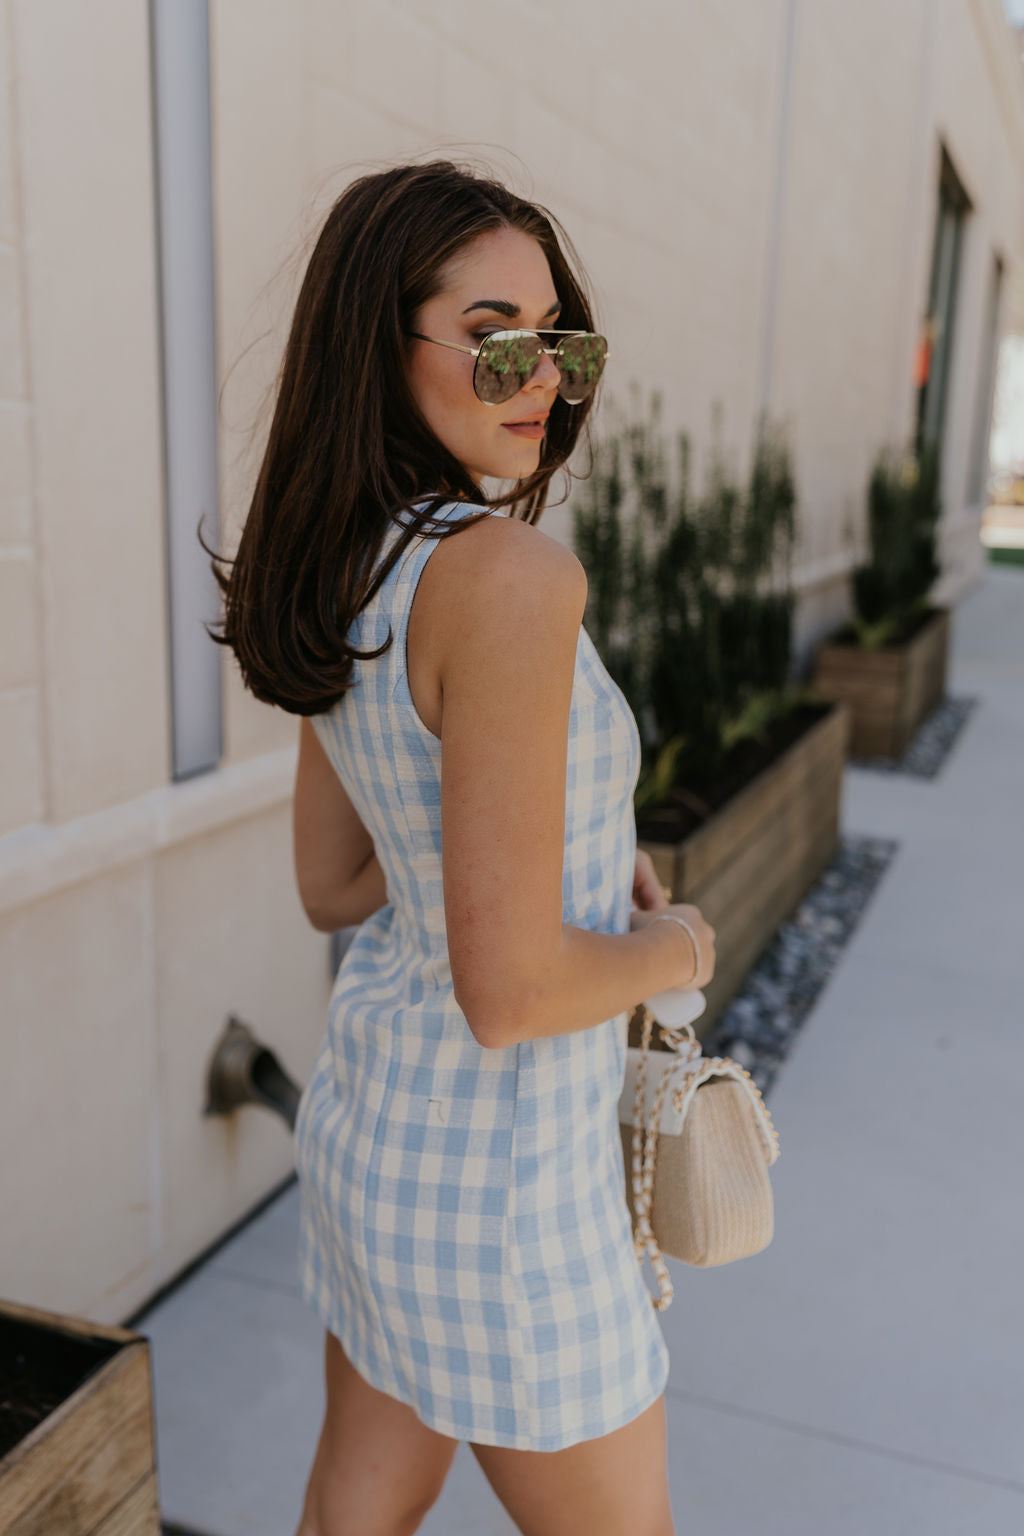 Upper body back/side view of female model wearing the Georgina Blue Gingham Mini Dress that has light blue and white gingham fabric, a noticed neckline, a side slit, and is sleeveless.